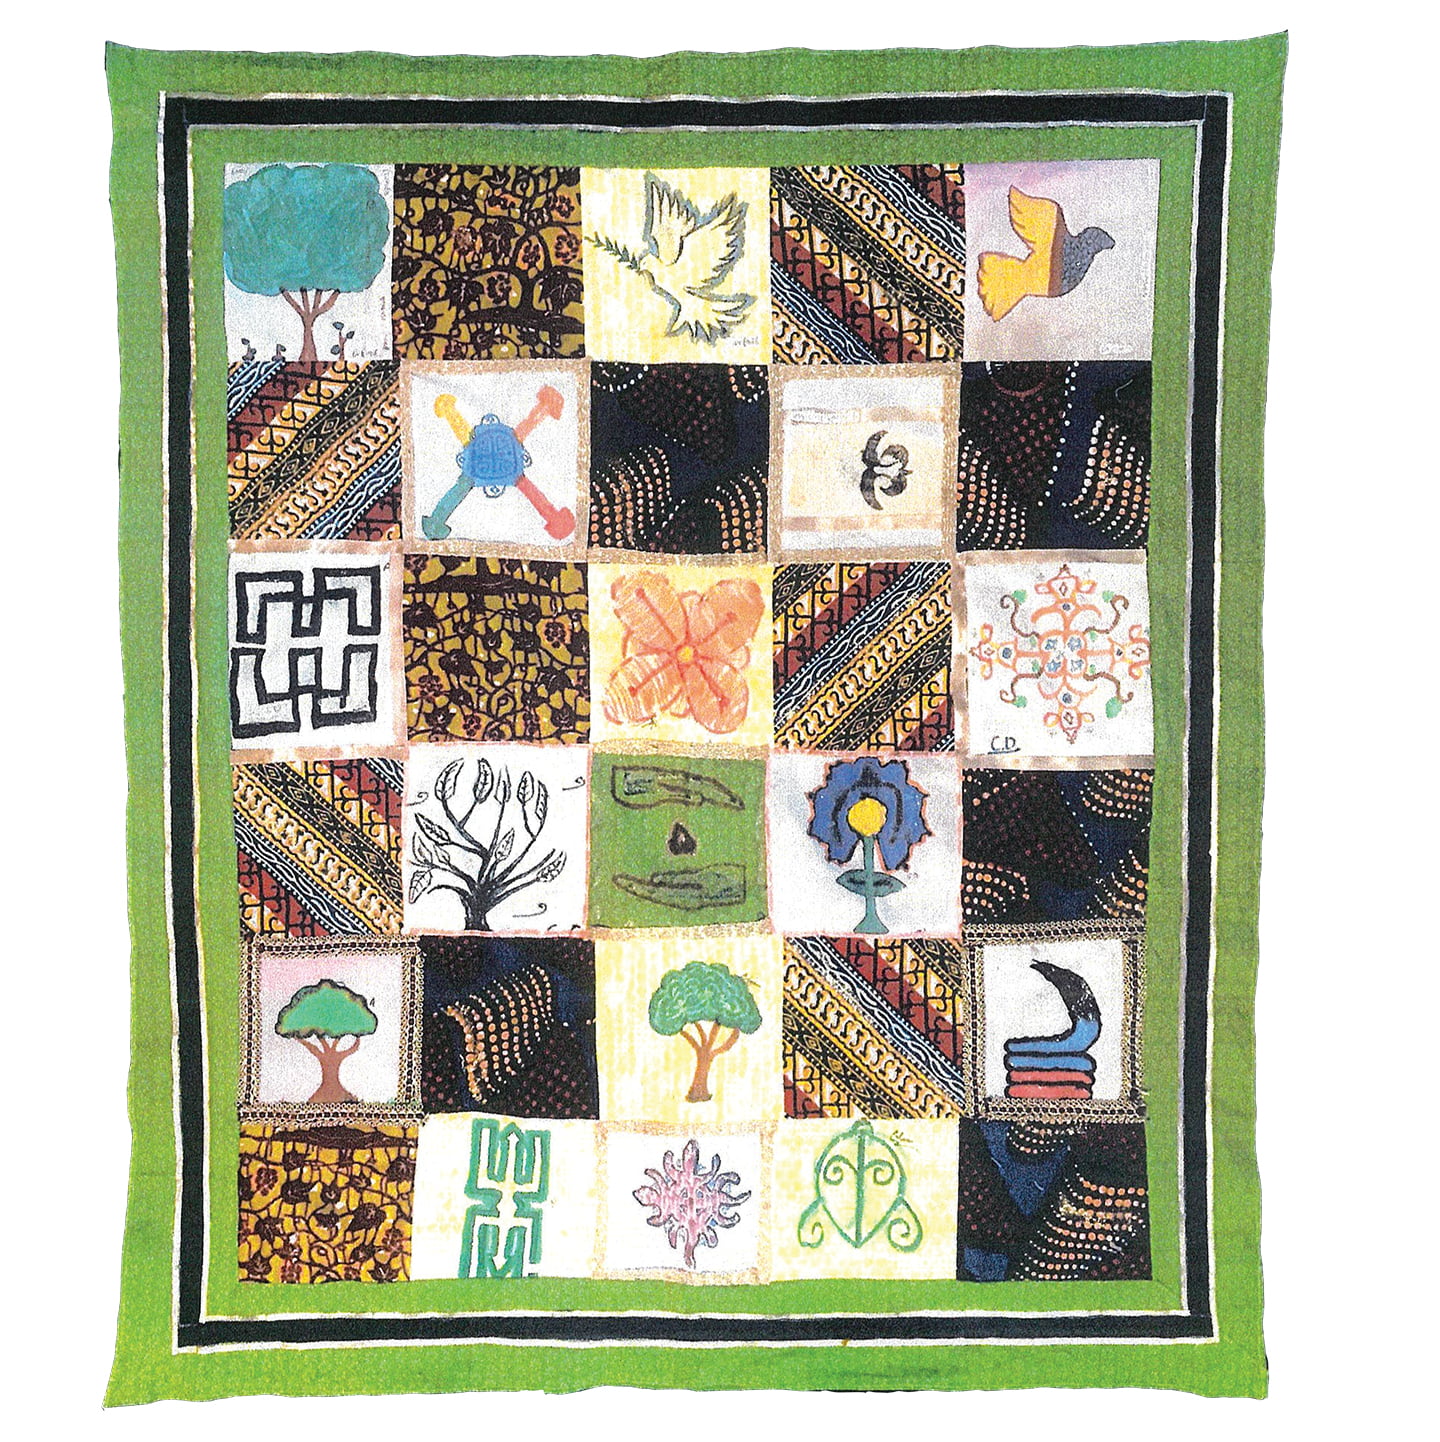 Community Quilt made by Gompers Elementary students